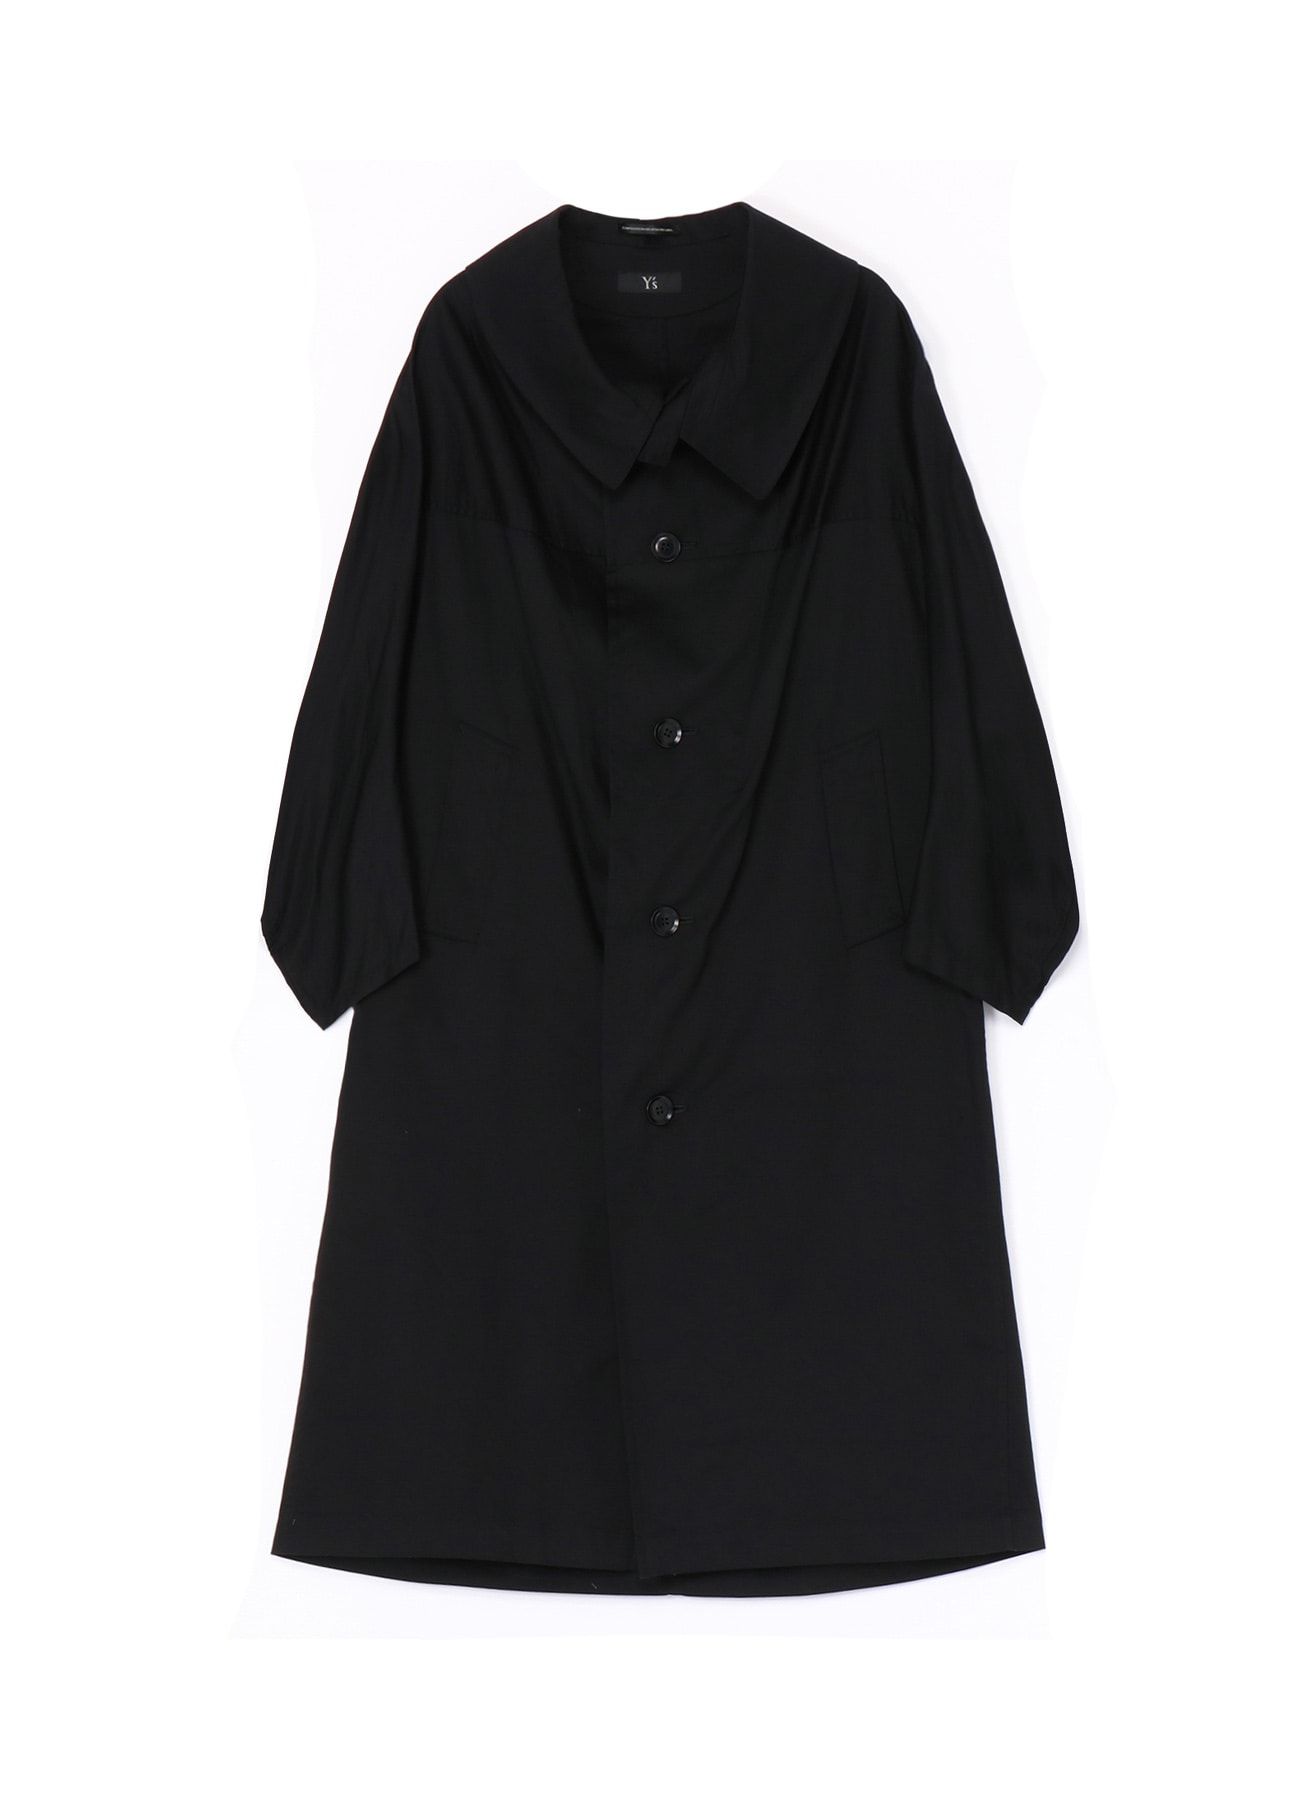 Y's｜ [Official] THE SHOP YOHJI YAMAMOTO (page 5/19)